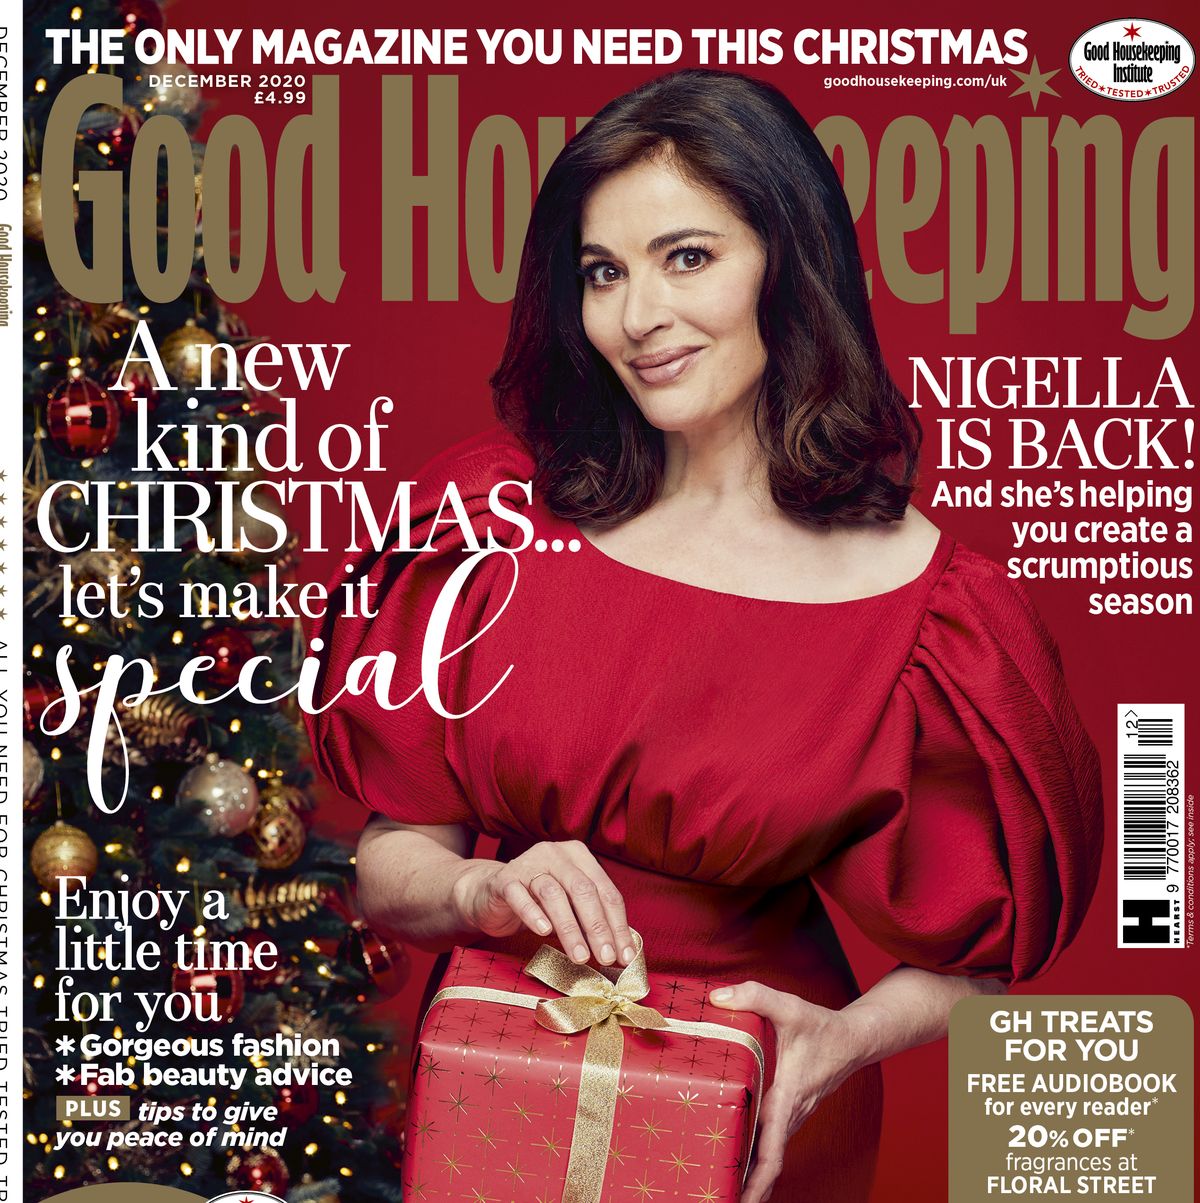 How to buy a Good Housekeeping magazine subscription